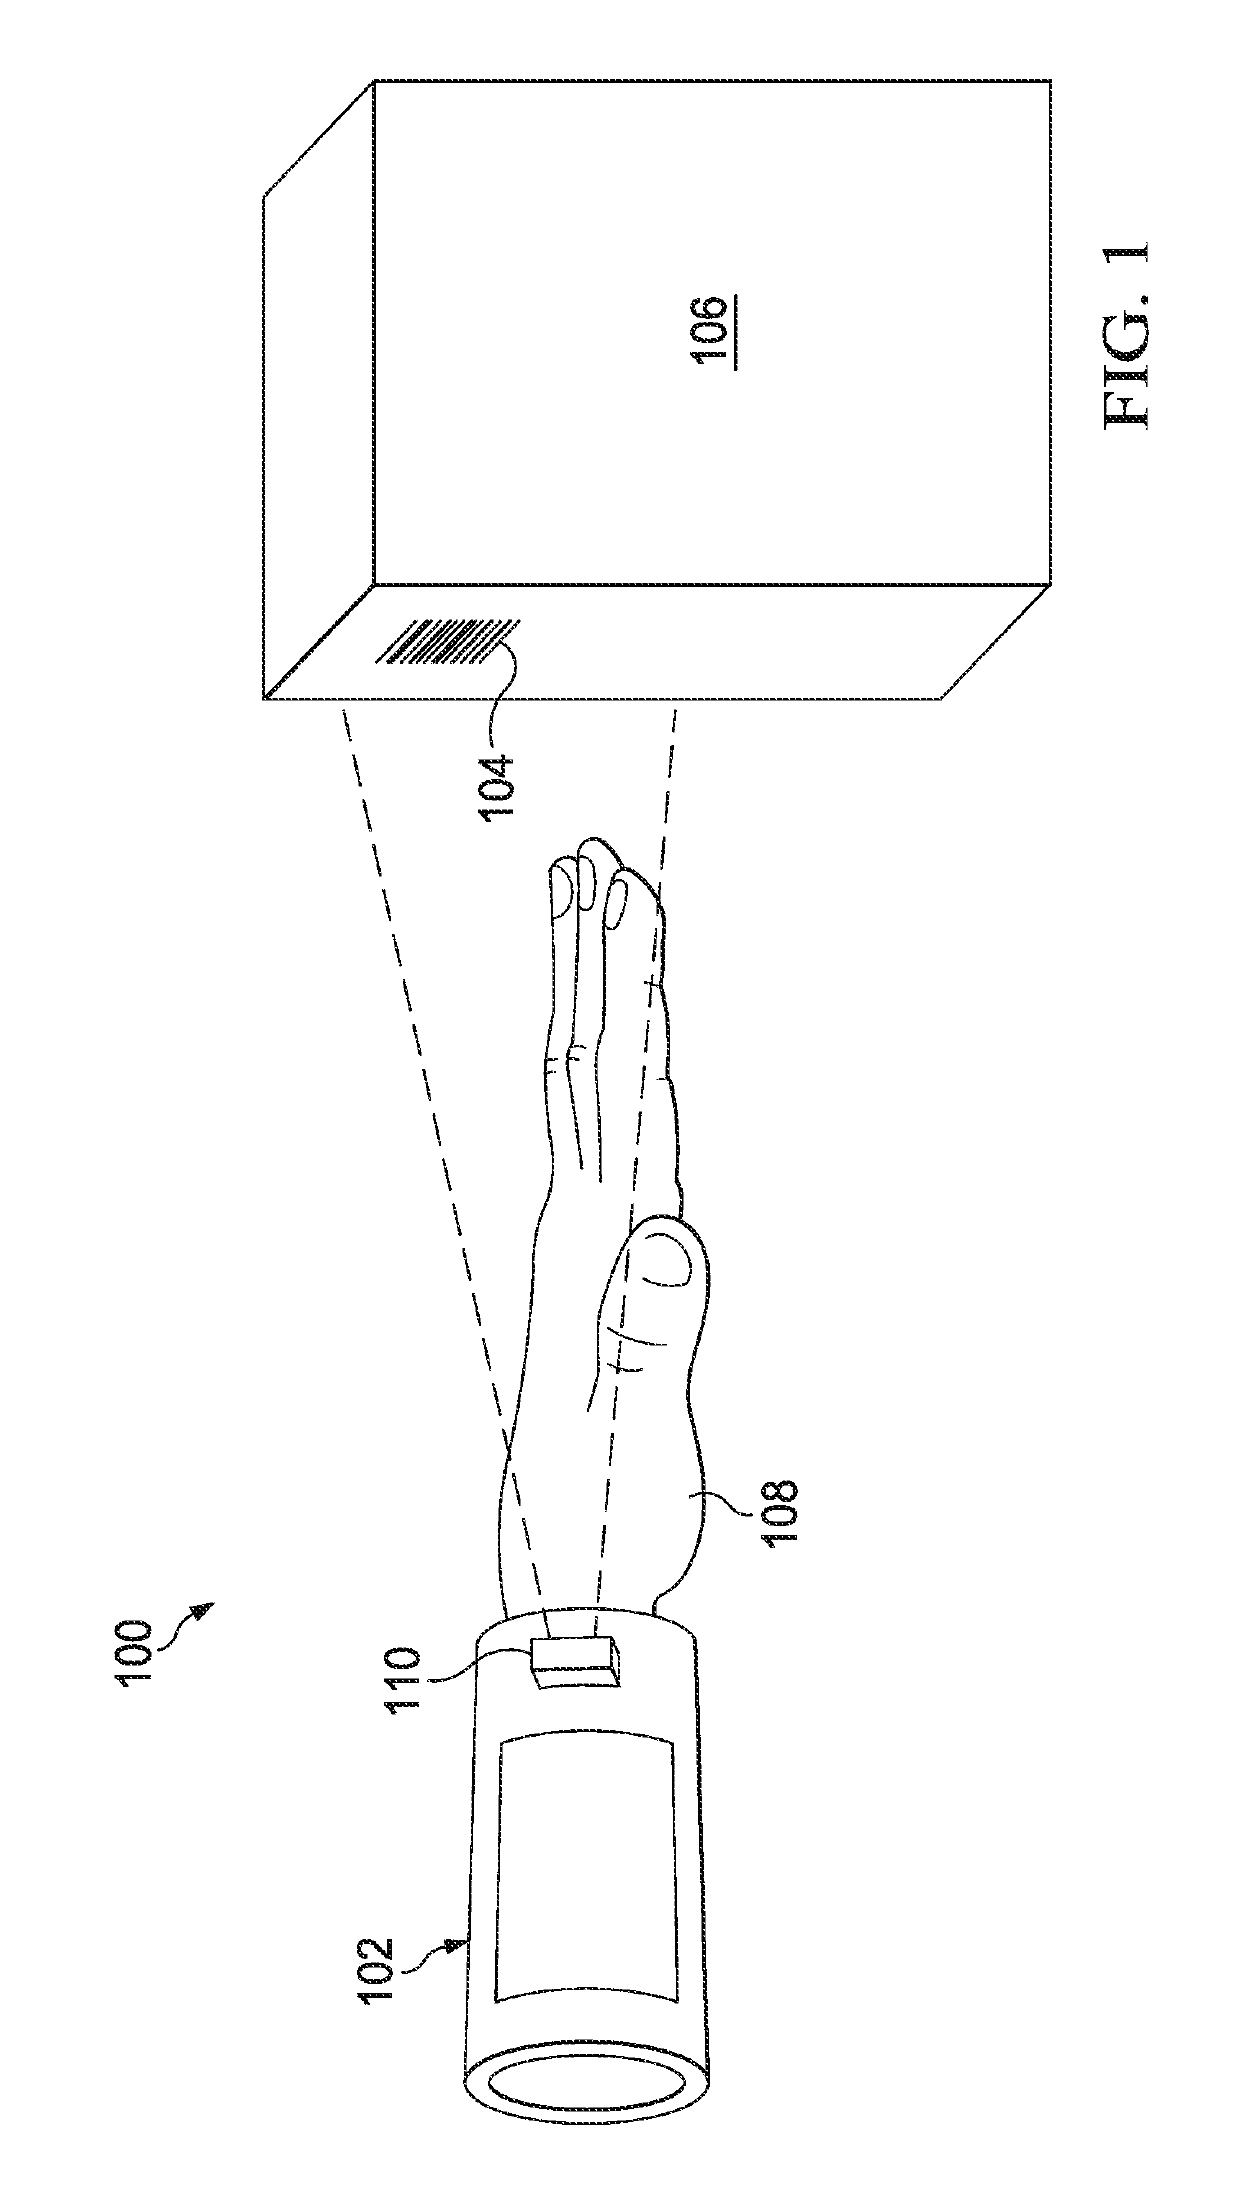 Low-profile wearable scanning device